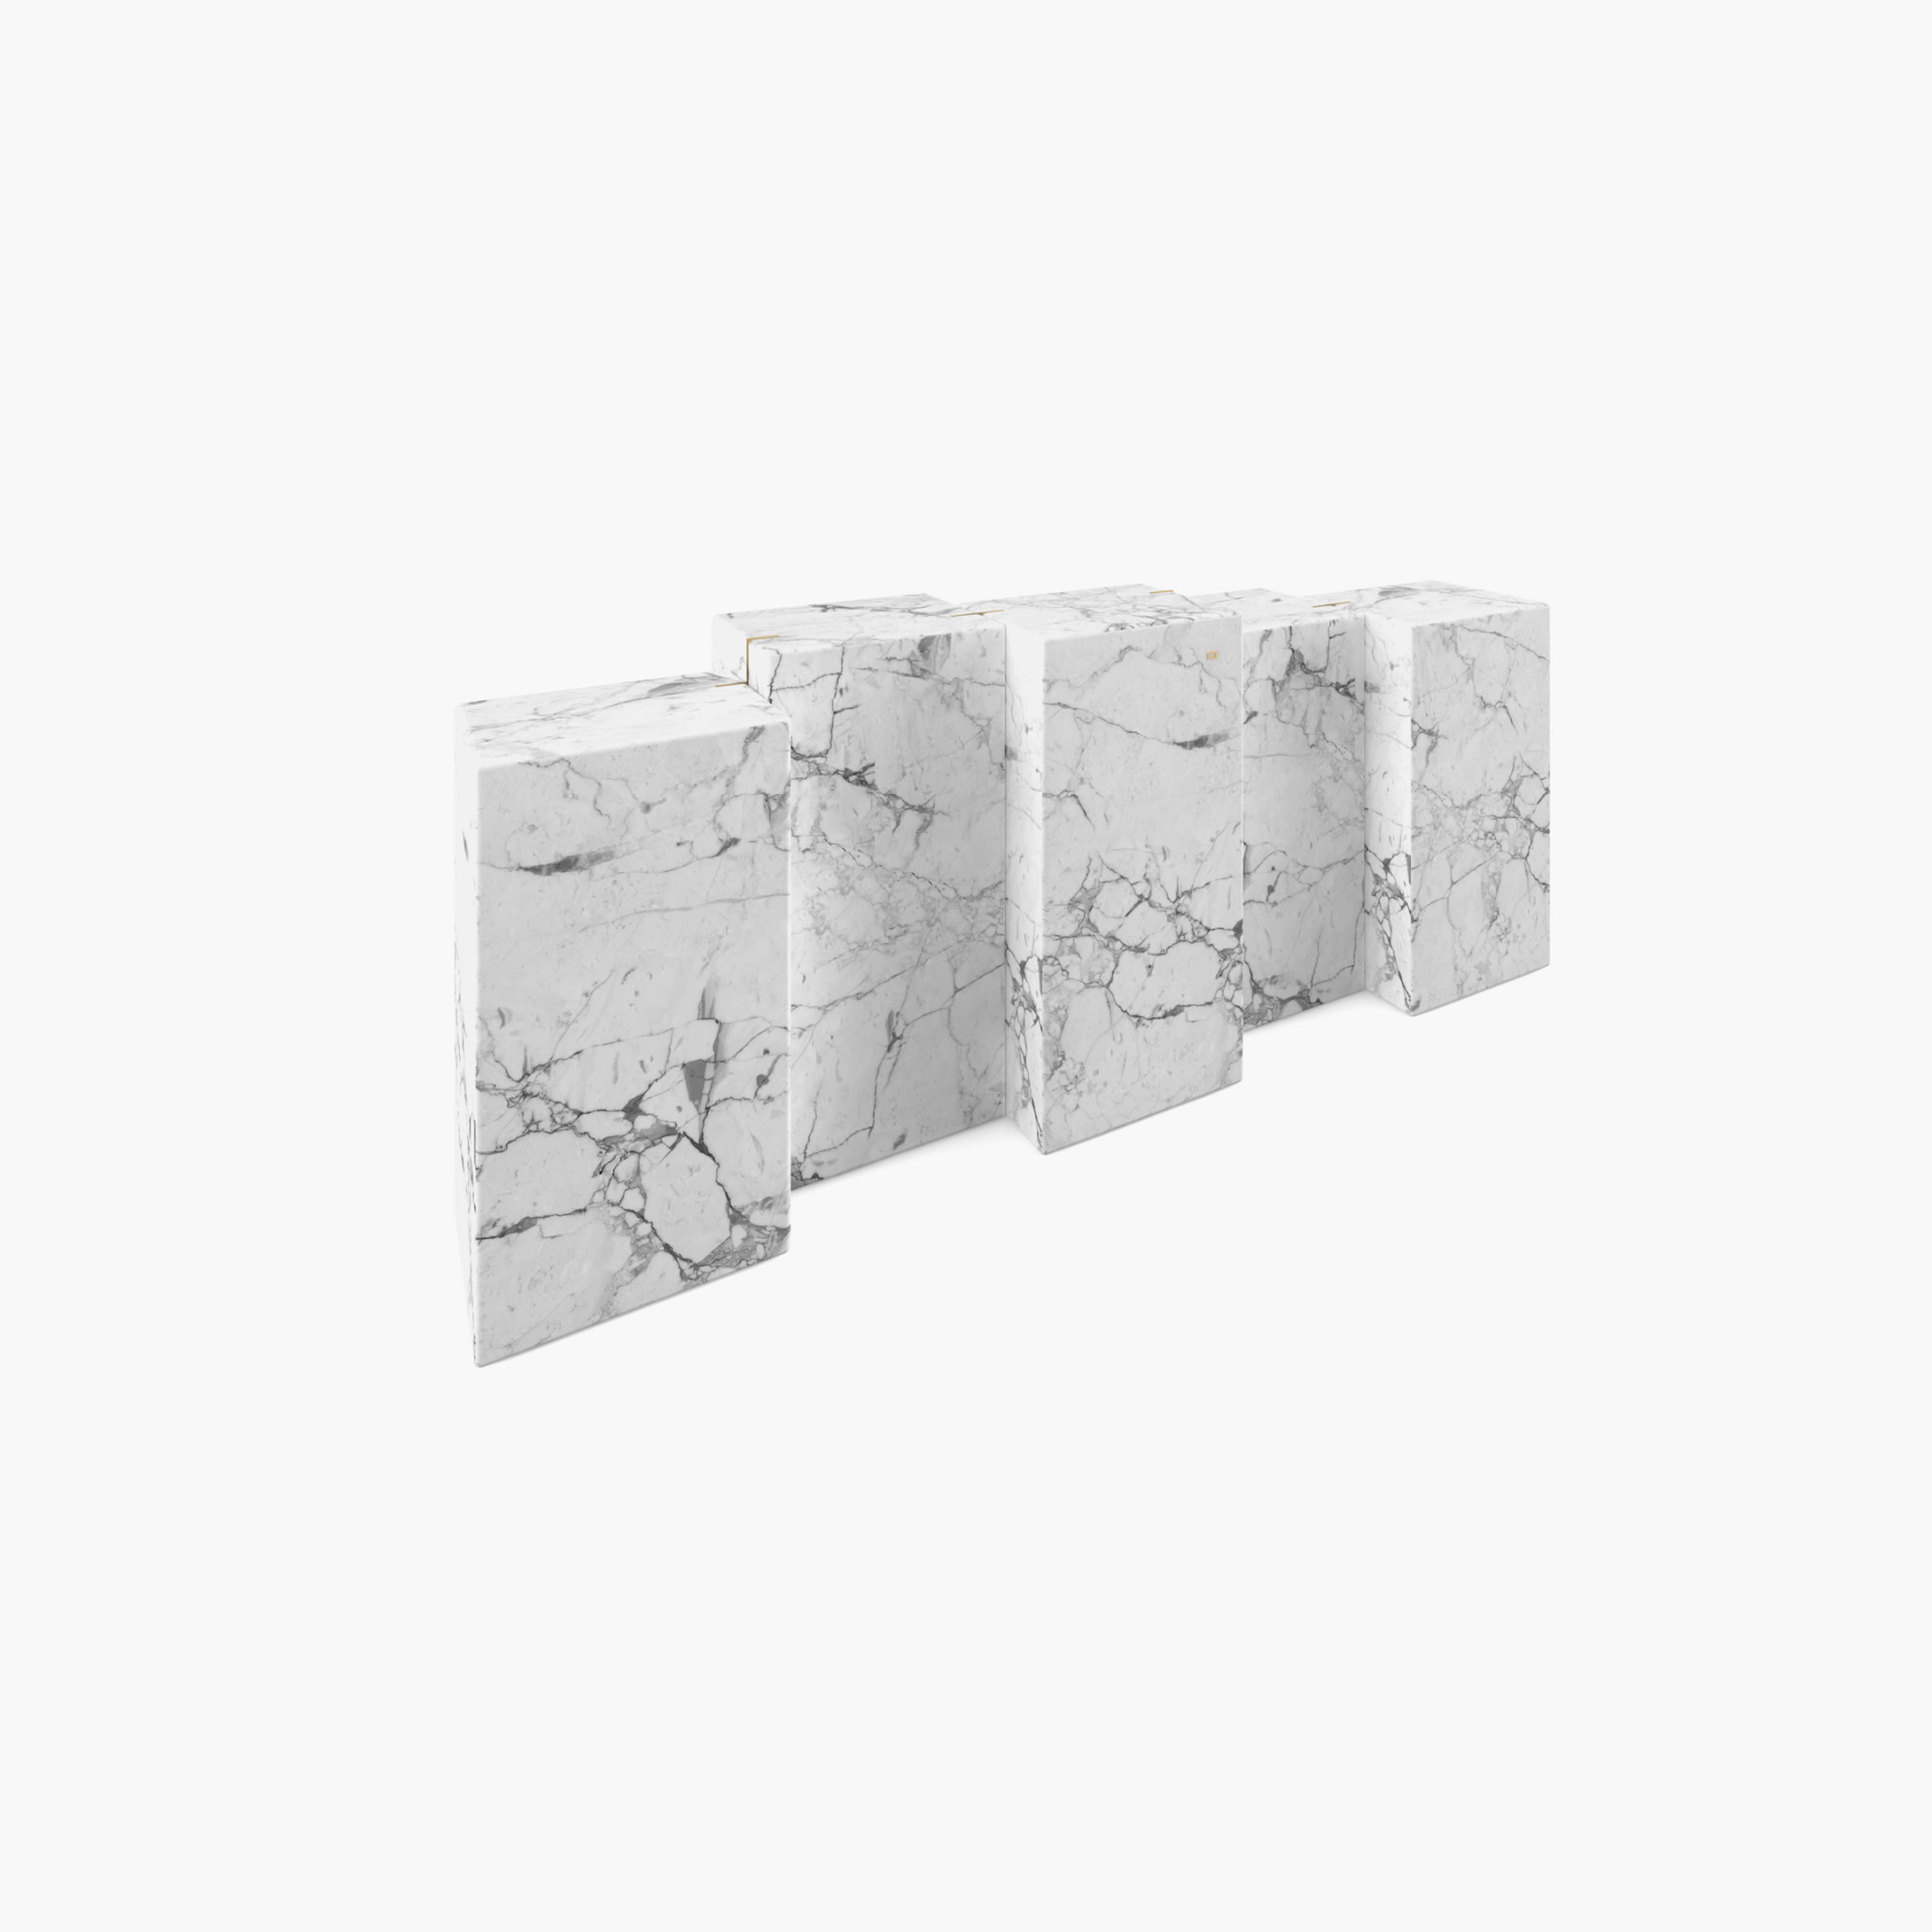 Sideboard square blocks of different heights White Arabescato Marble art Living Room art works Sideboards FS 8 FELIX SCHWAKE